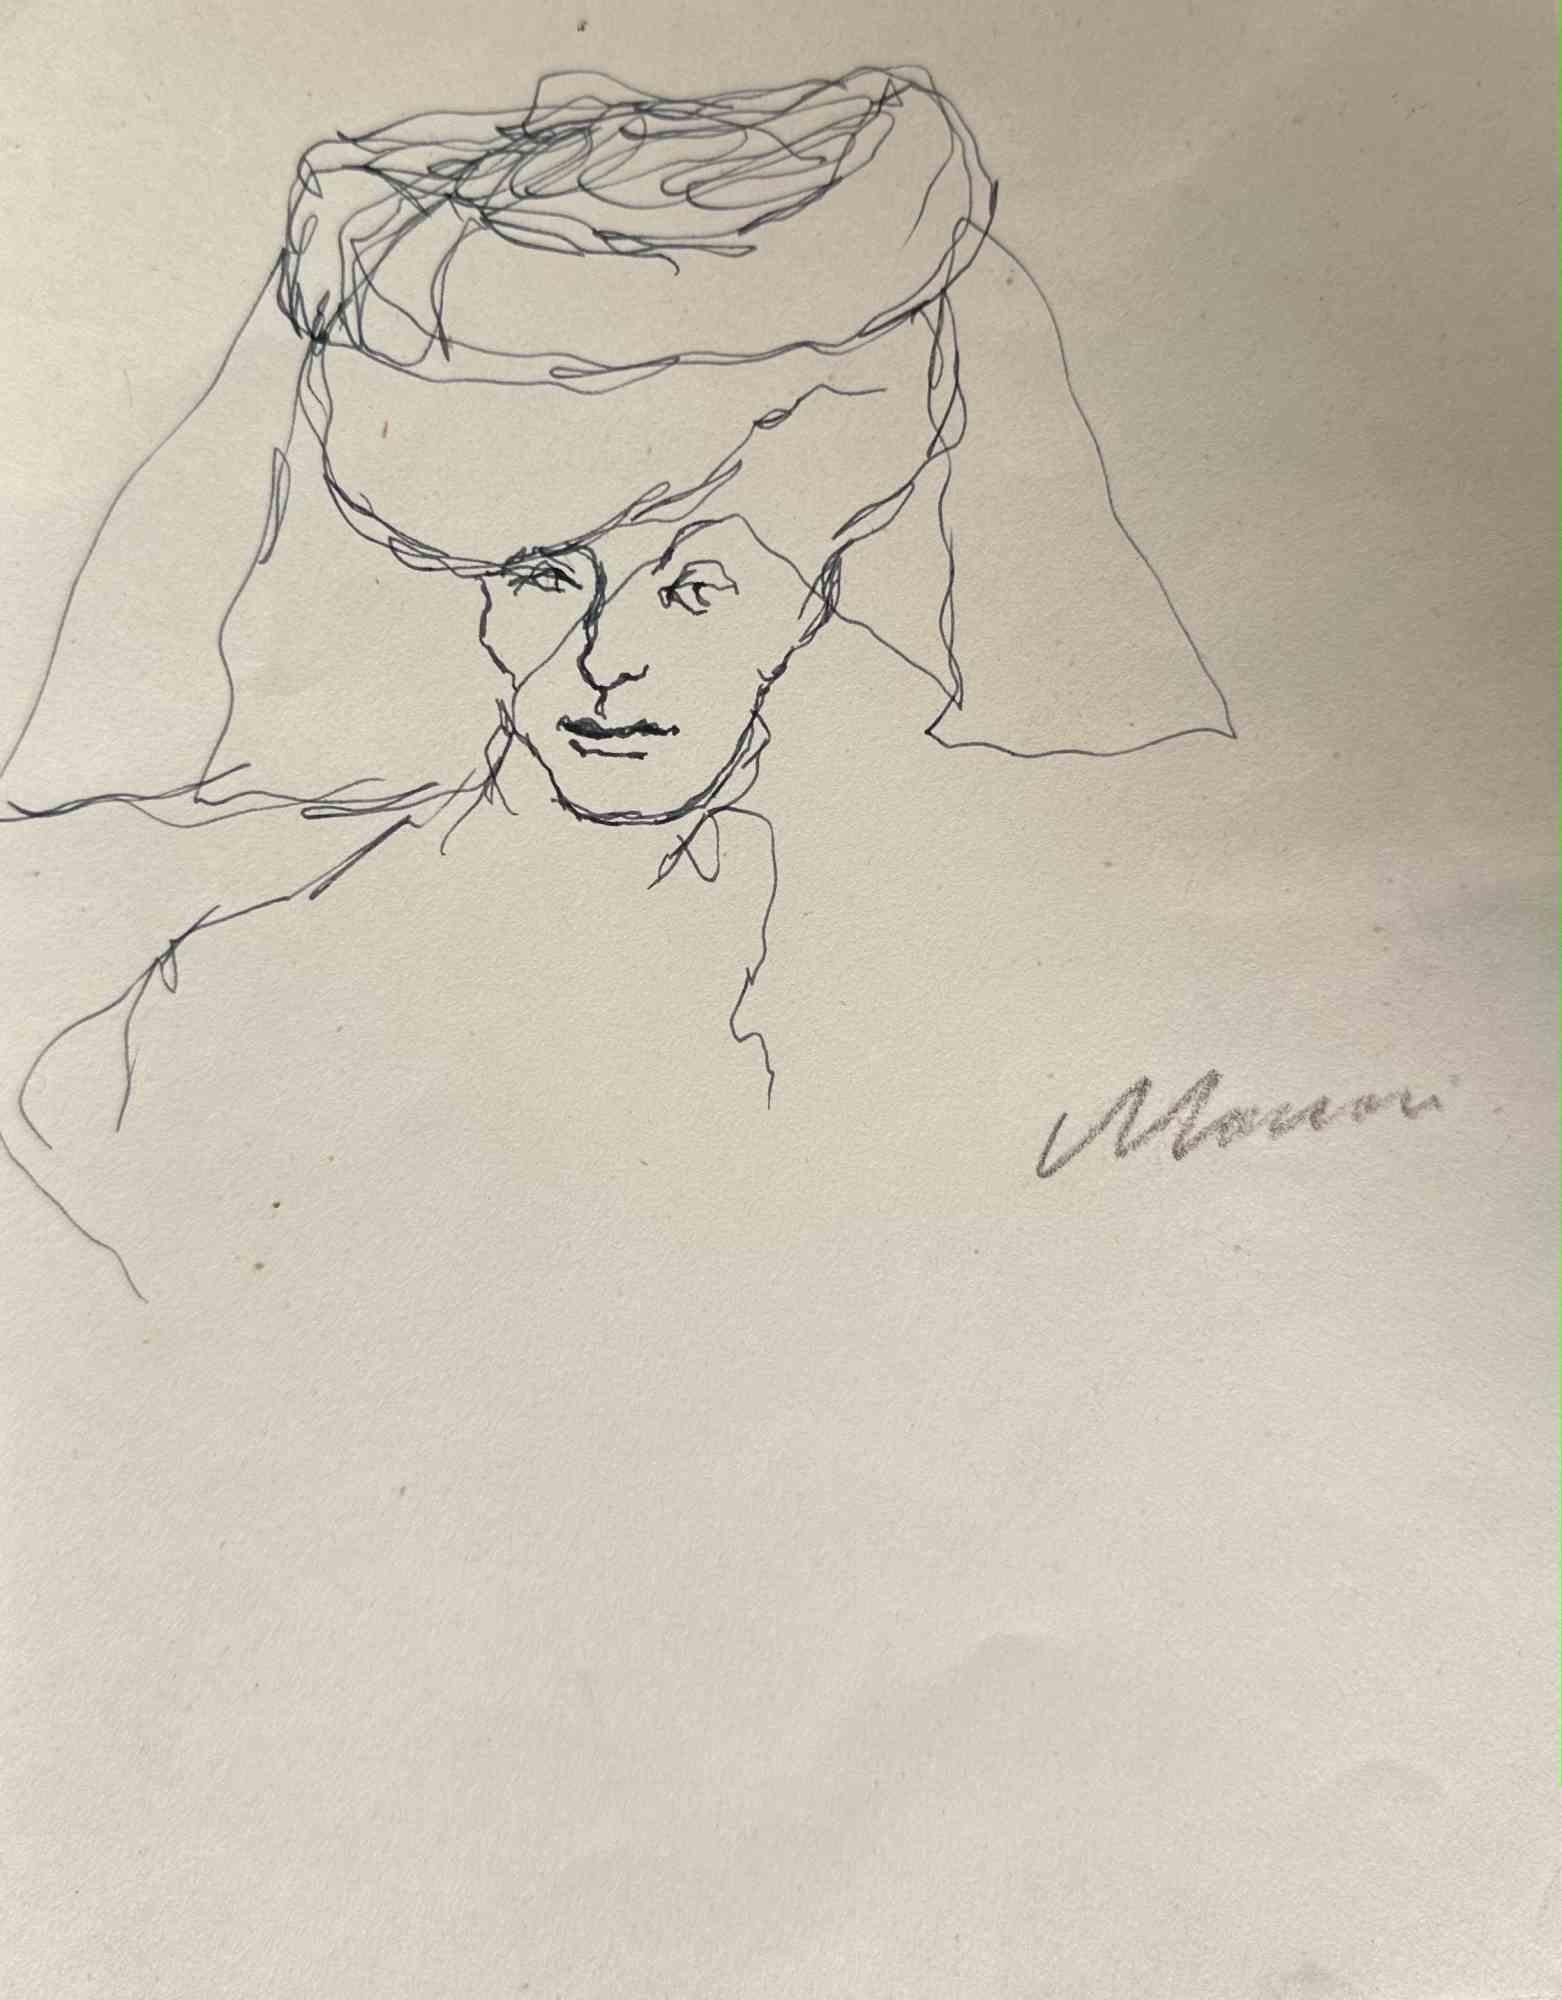 Lady With Lace Hat is a pen Drawing realized by Mino Maccari  (1924-1989) in the 1960s.

Hand-signed on the lower.

Good conditions.

Mino Maccari (Siena, 1924-Rome, June 16, 1989) was an Italian writer, painter, engraver and journalist, winner of